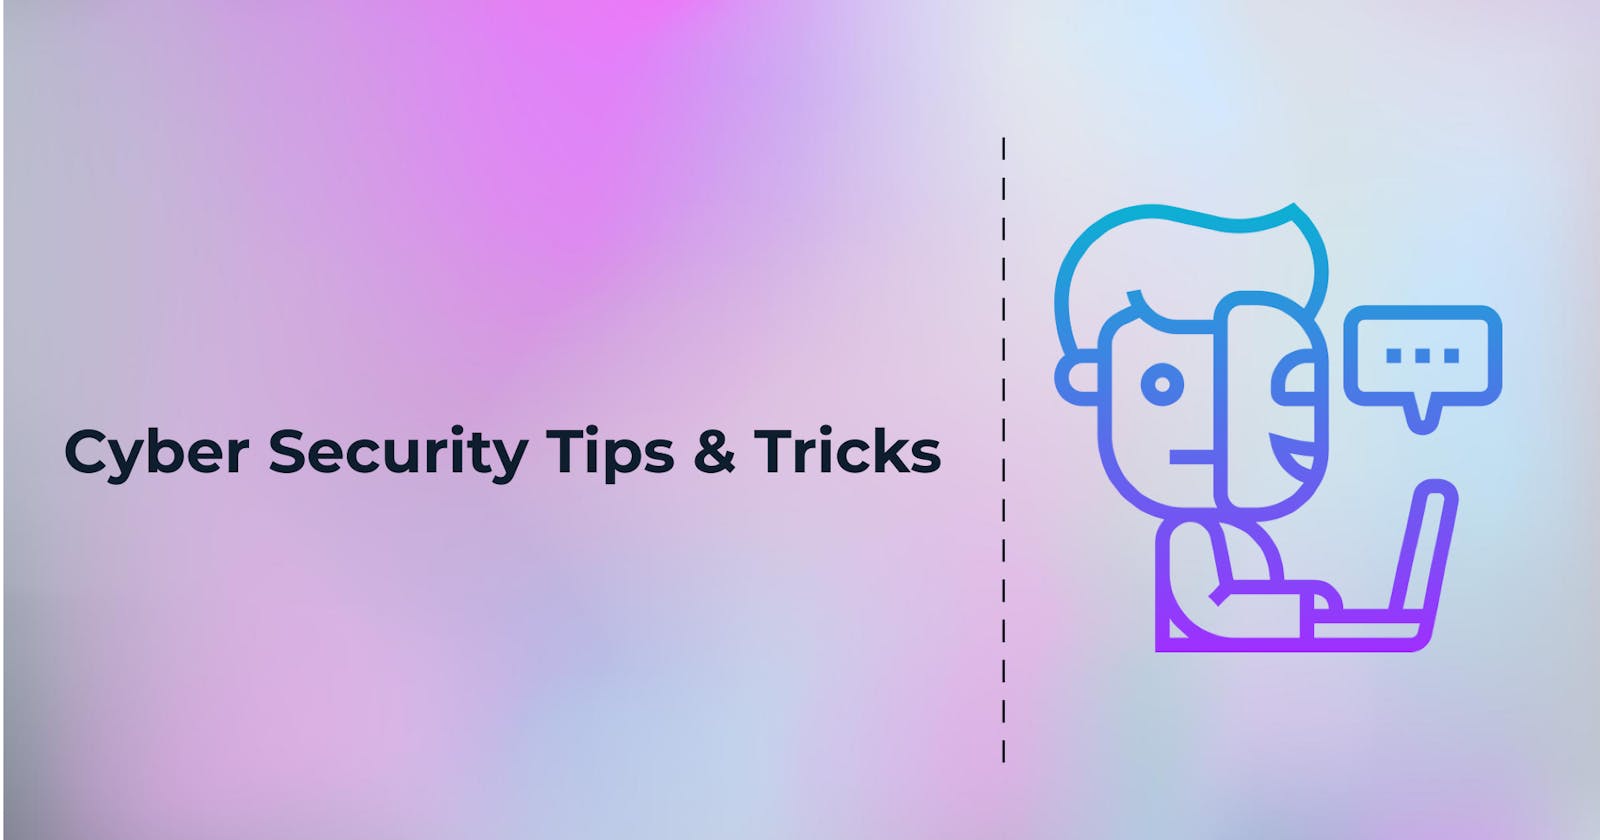 Cyber Security Tips & Tricks